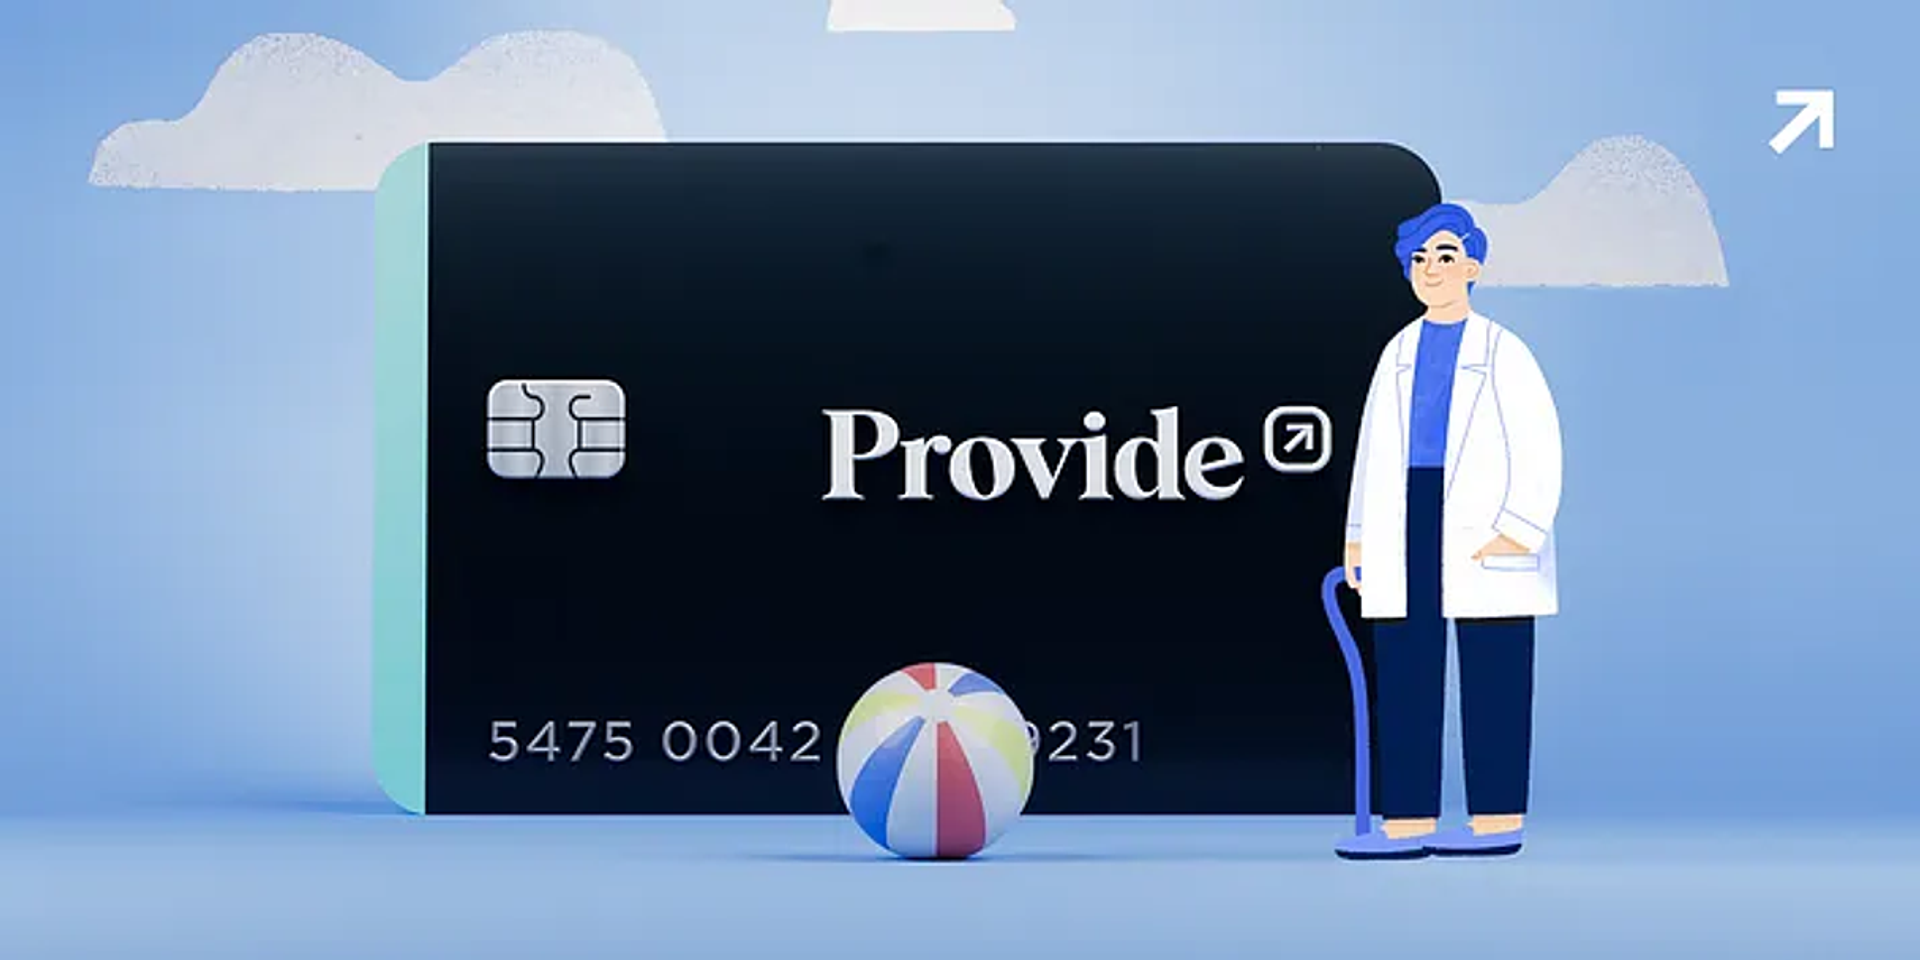 Image for Provide releases new credit card tailored to healthcare practice owners